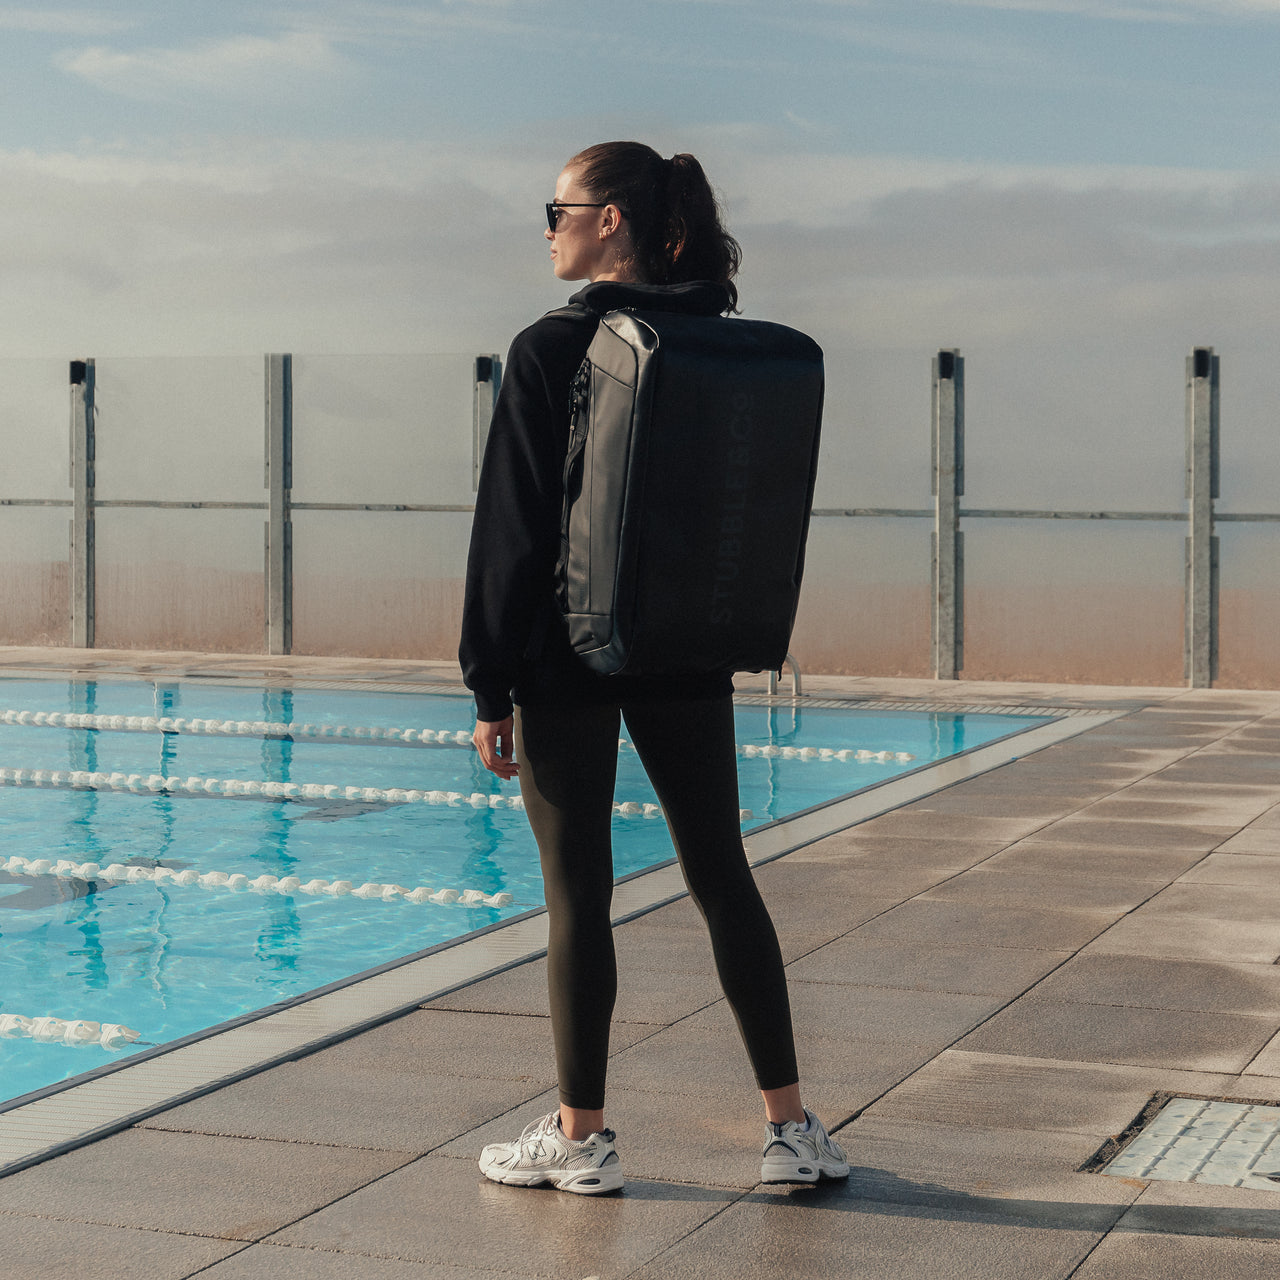 Women wearing The Kit Bag Backpack by swimming pool